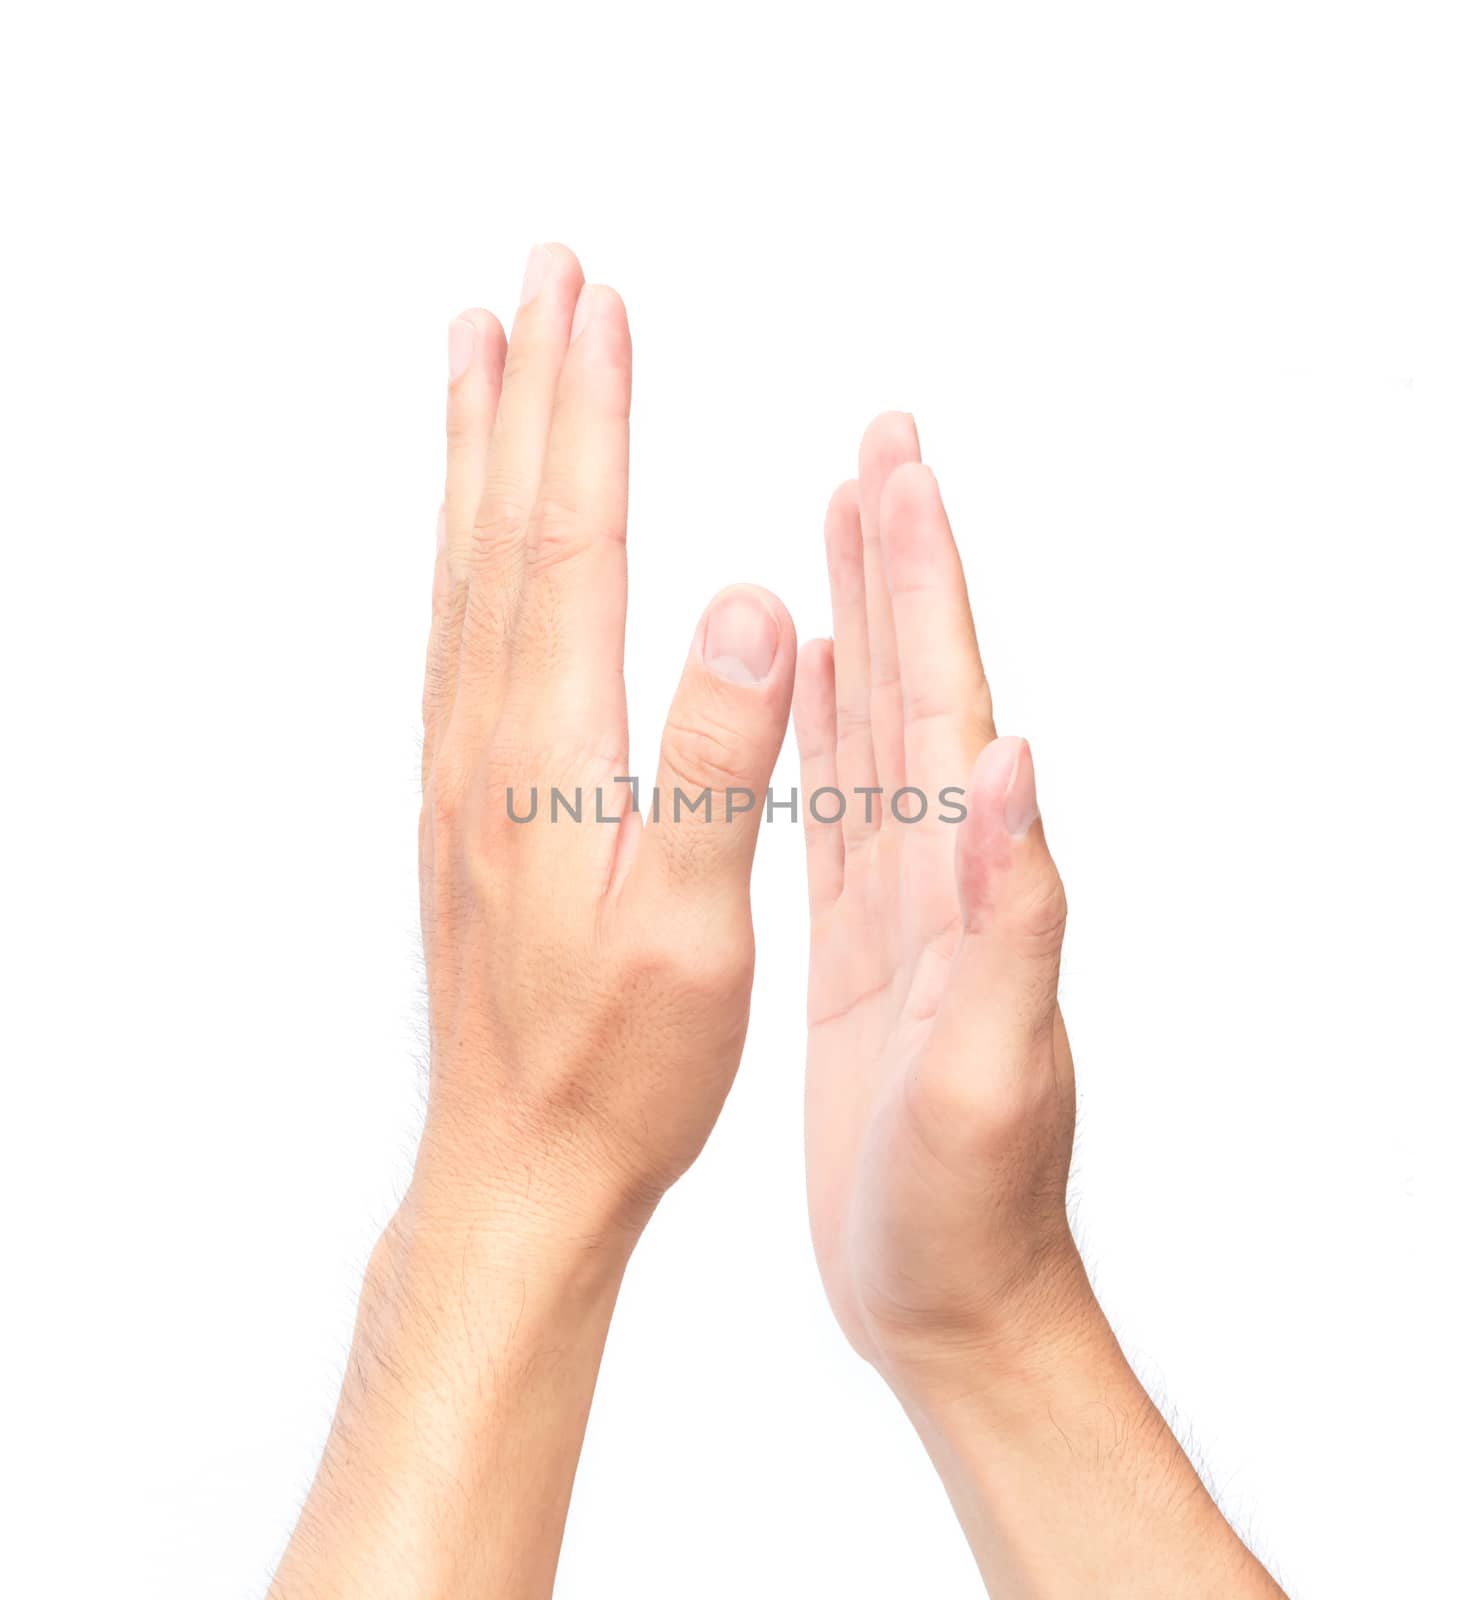 Man clapping hands on white background by pt.pongsak@gmail.com